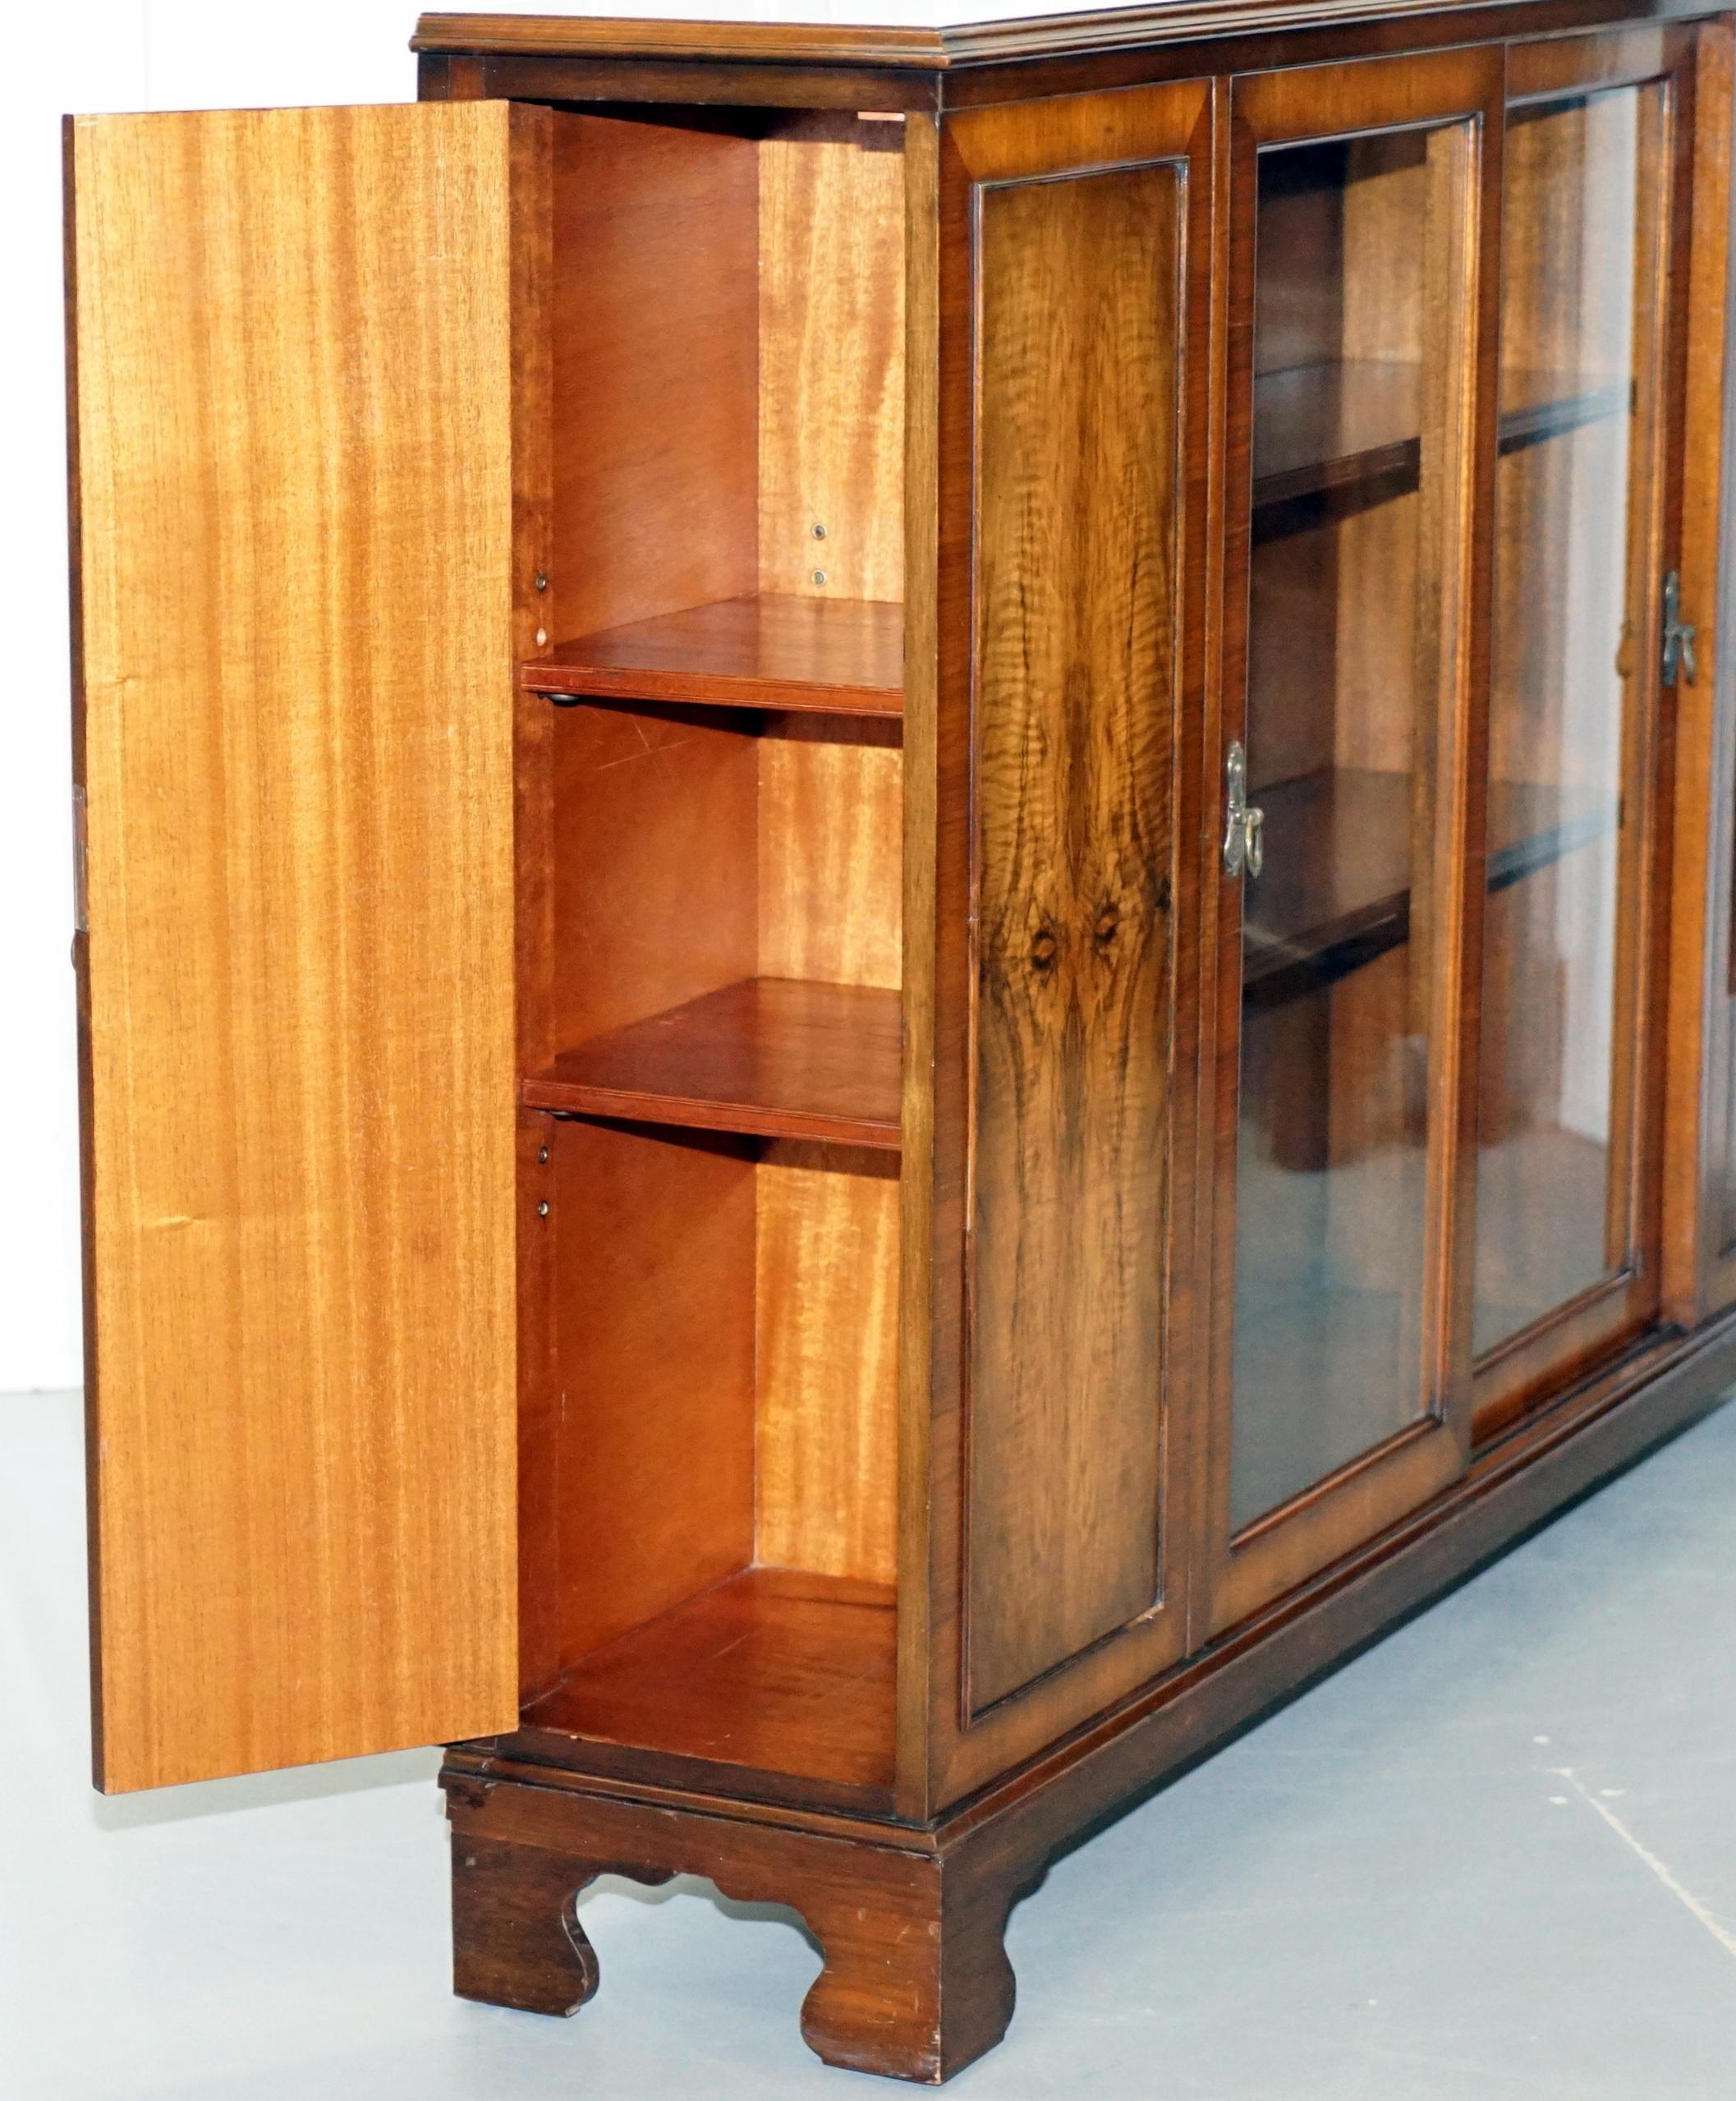 Matching Pair of Stunning Figured Walnut Sideboard Bookcases with Side Cupboards 1